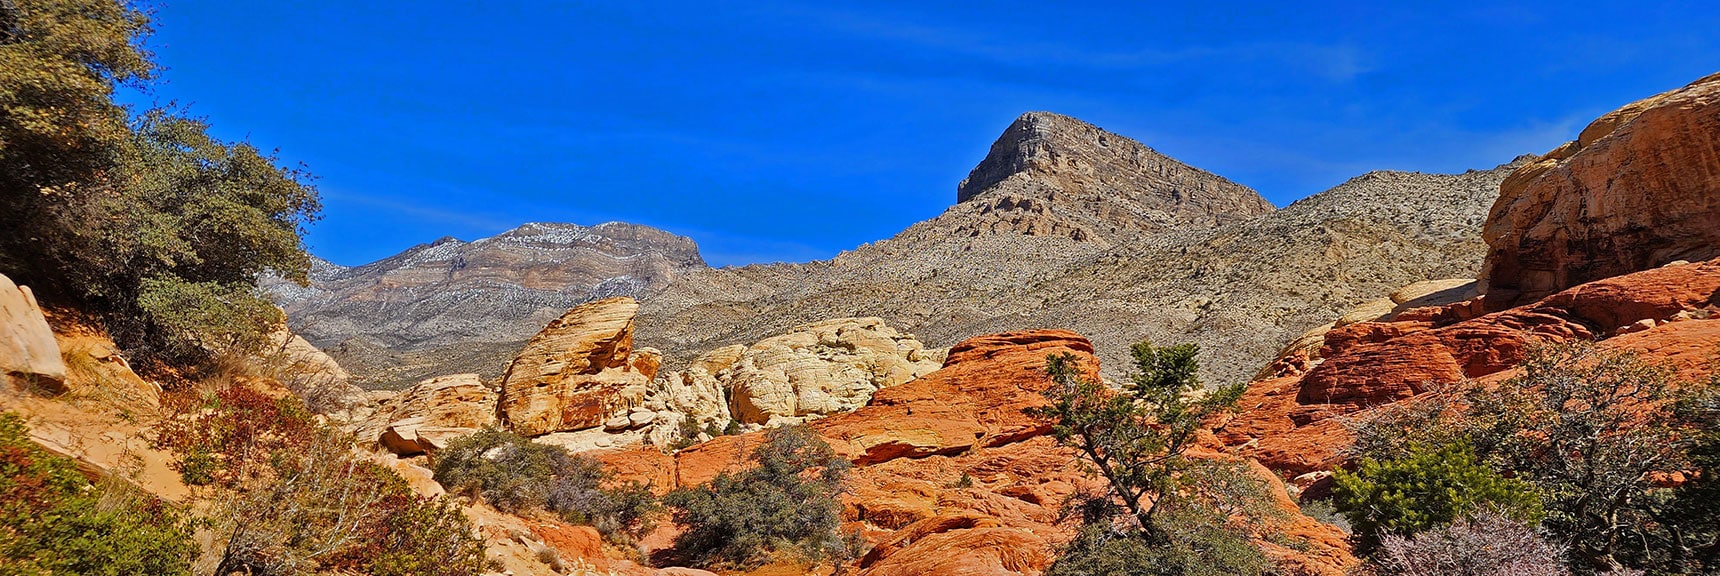 Iconic View of Turtlehead Peak Down the Calico Tanks Trail. | Ash Canyon to Calico Tanks | Calico Basin and Red Rock Canyon, Nevada | David Smith | Las Vegas Area Trails